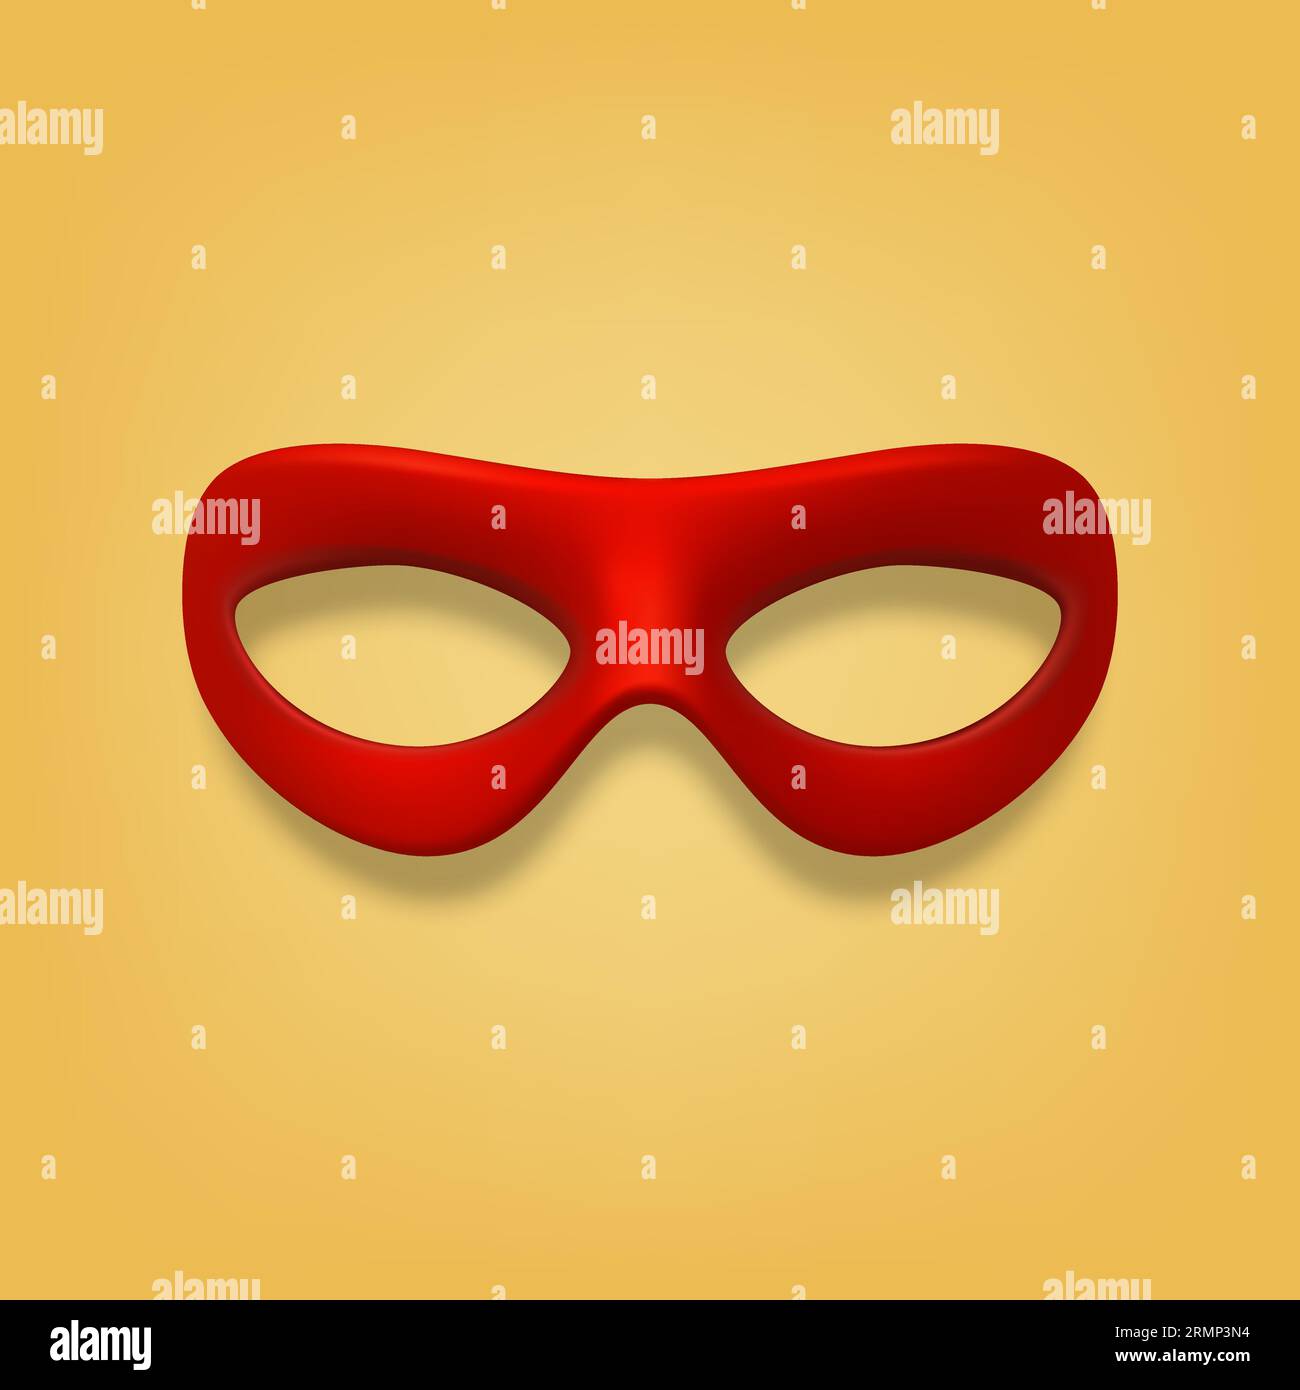 Vector 3d Realistic Blank Red Hero Carnival Eye Mask on Yellow Background Closeup. Hero Mask for Carnival, Party, Masquerade Glasses. Design Template Stock Vector